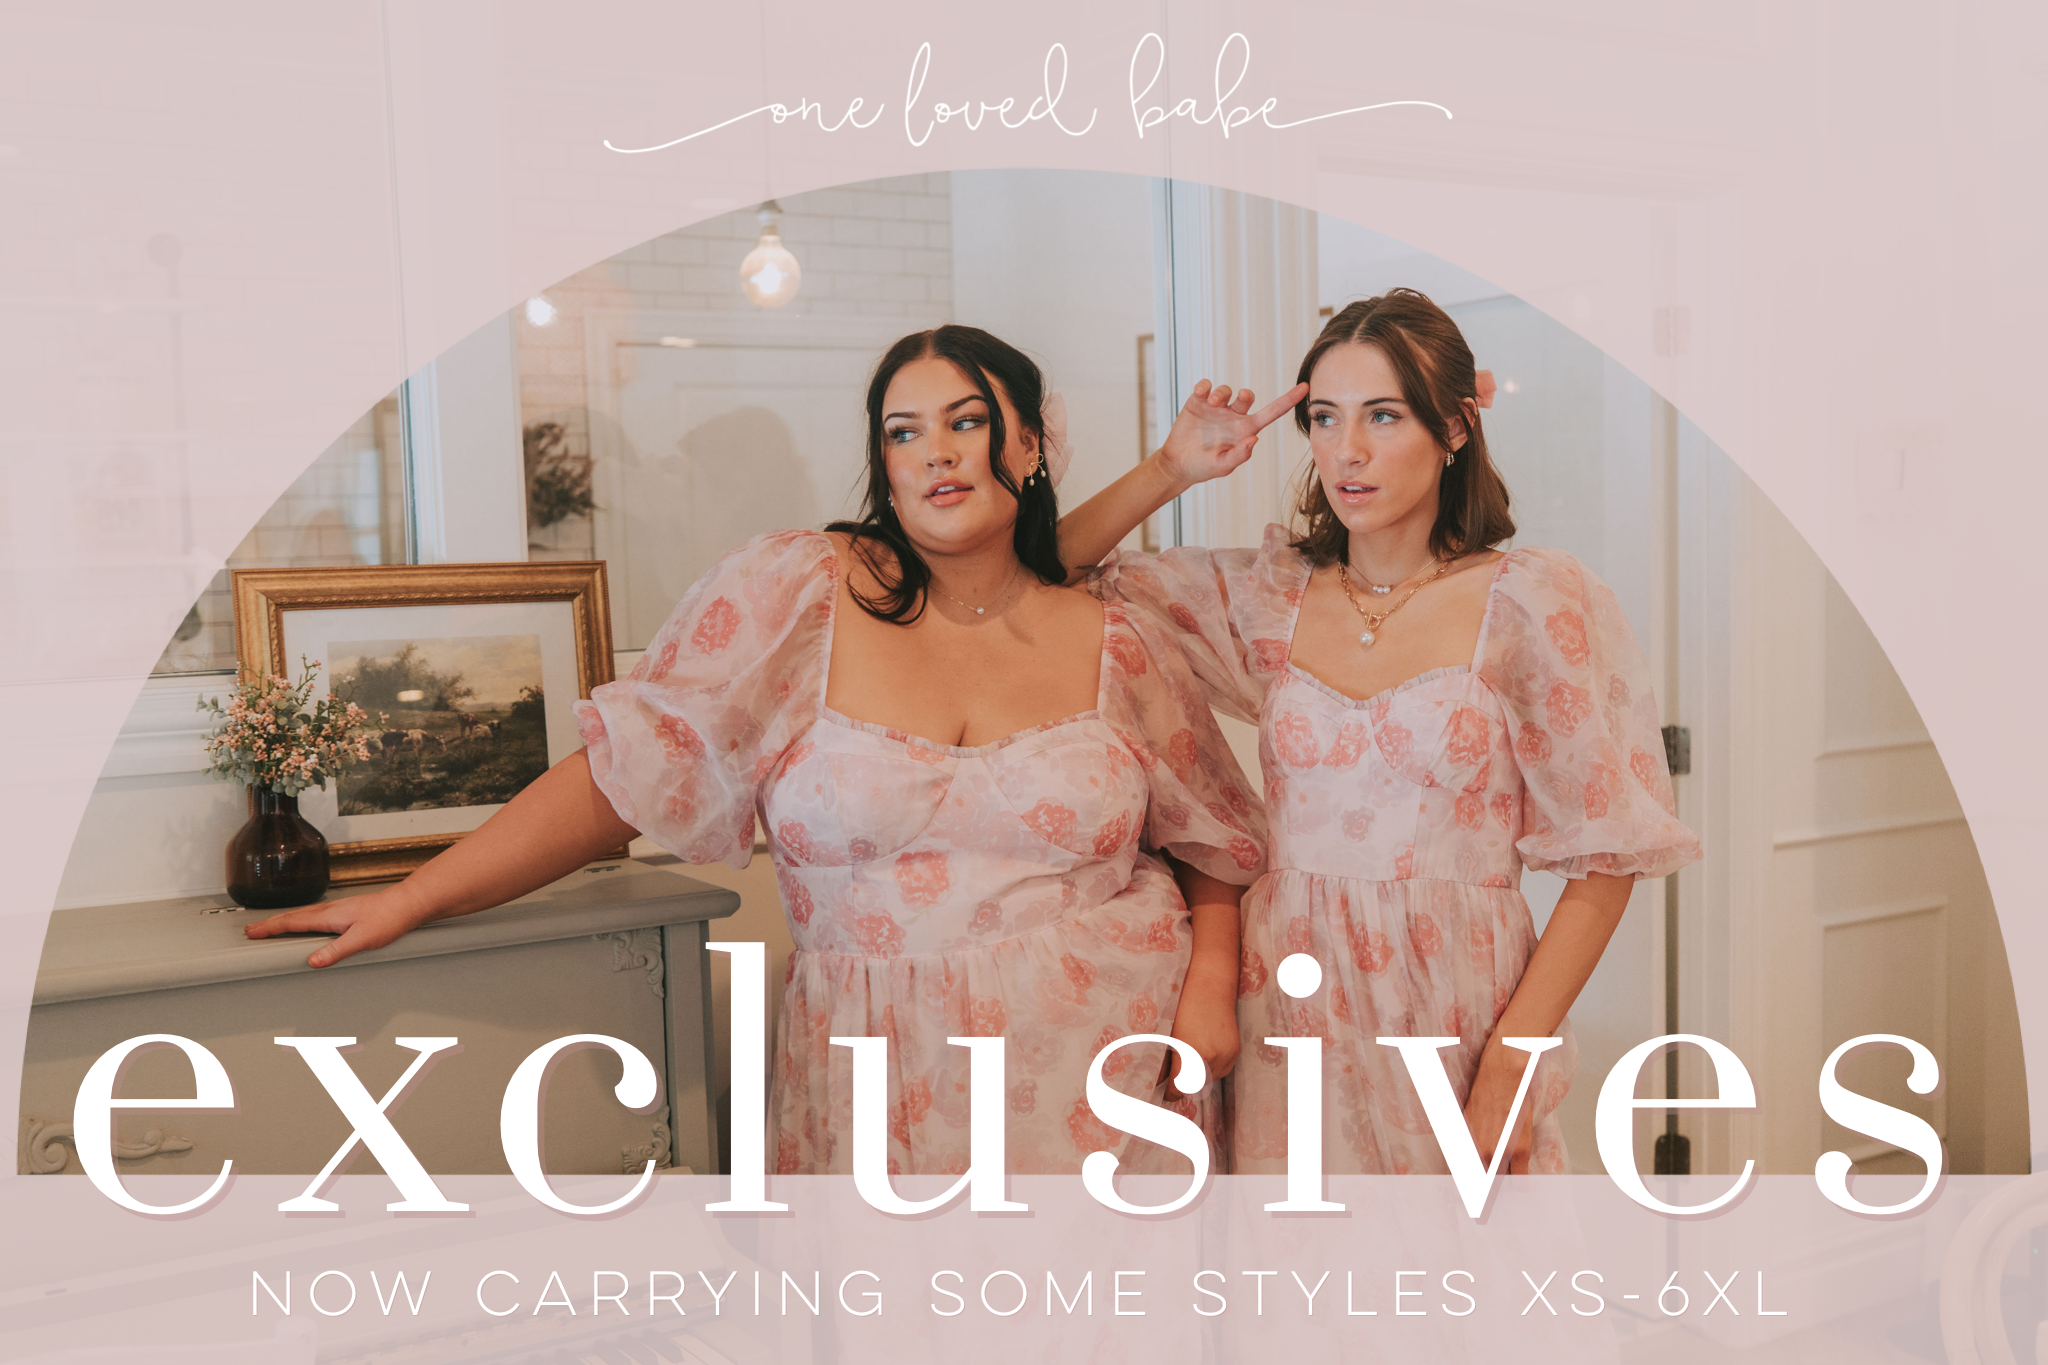 Why don't more NZ brands stock plus sizes?